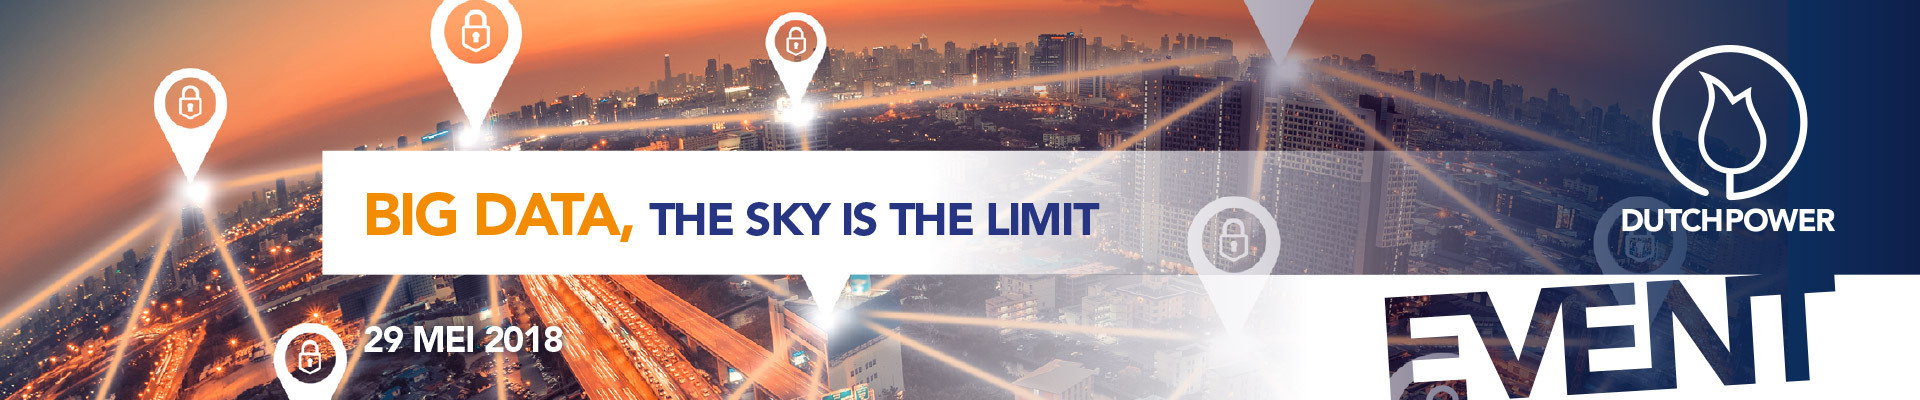 Big Data, the SKY is the limit